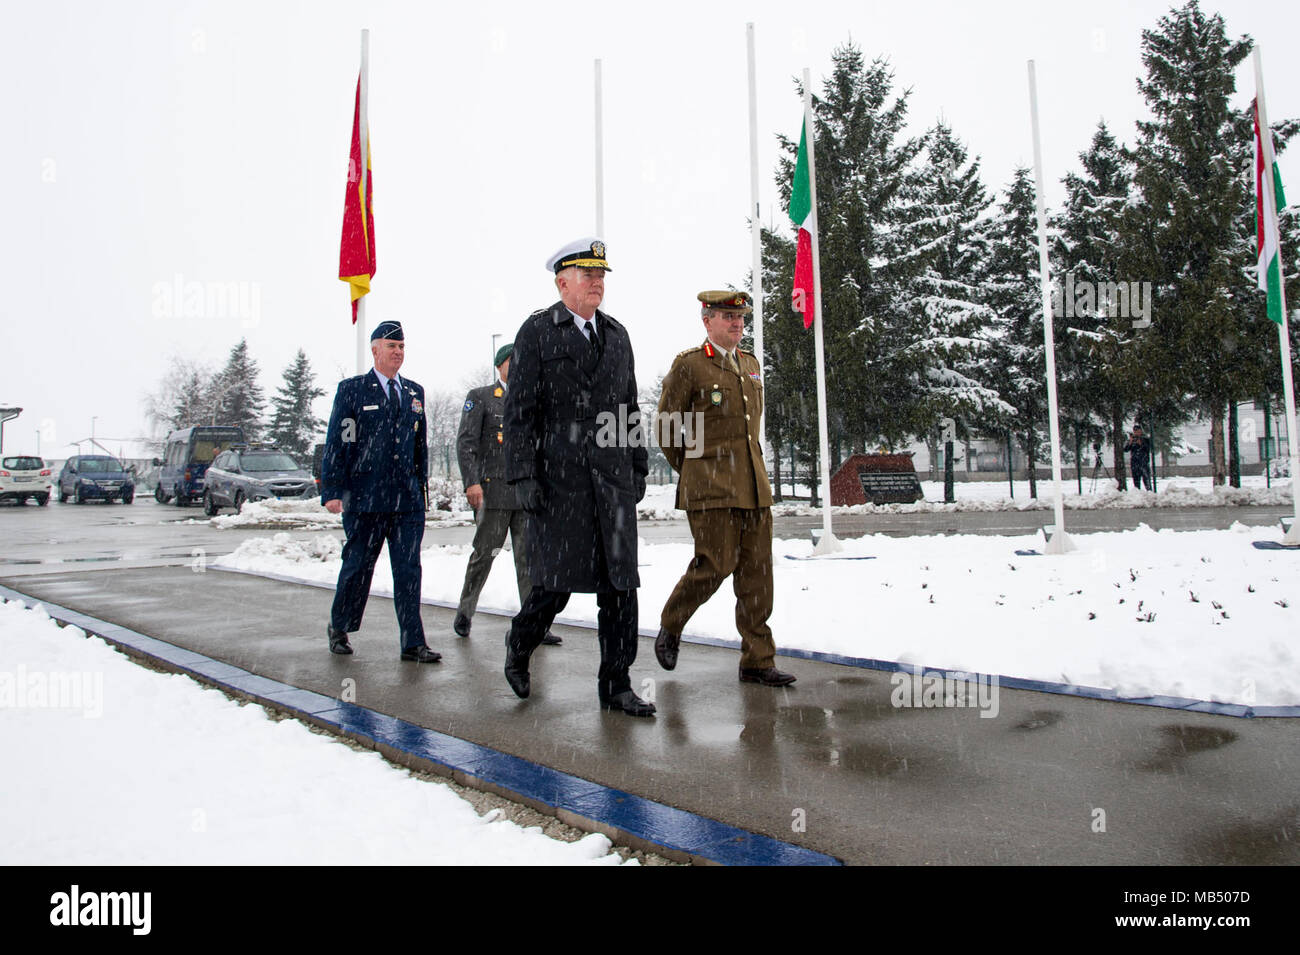 U.S. Navy Admiral James Foggo, U.K. Army General Sir James Everard, Austrian Army Maj. Gen. Anton Waldner, and U.S. Air Force Brig. Gen. Robert Huston march to inspect European soldiers during a welcome ceremony, Feb. 21, 2018 to the NATO and EUFOR Headquarters, Camp Butmir, Sarajevo. Foggo serves as Allied Joint Force Command Naples commander, Everard serves as NATO's Deputy Supreme Allied Commander Europe, Waldner serves as the European Union Force Althea commander, and Huston serves as the NATO Headquarters Sarajevo commander. Stock Photo